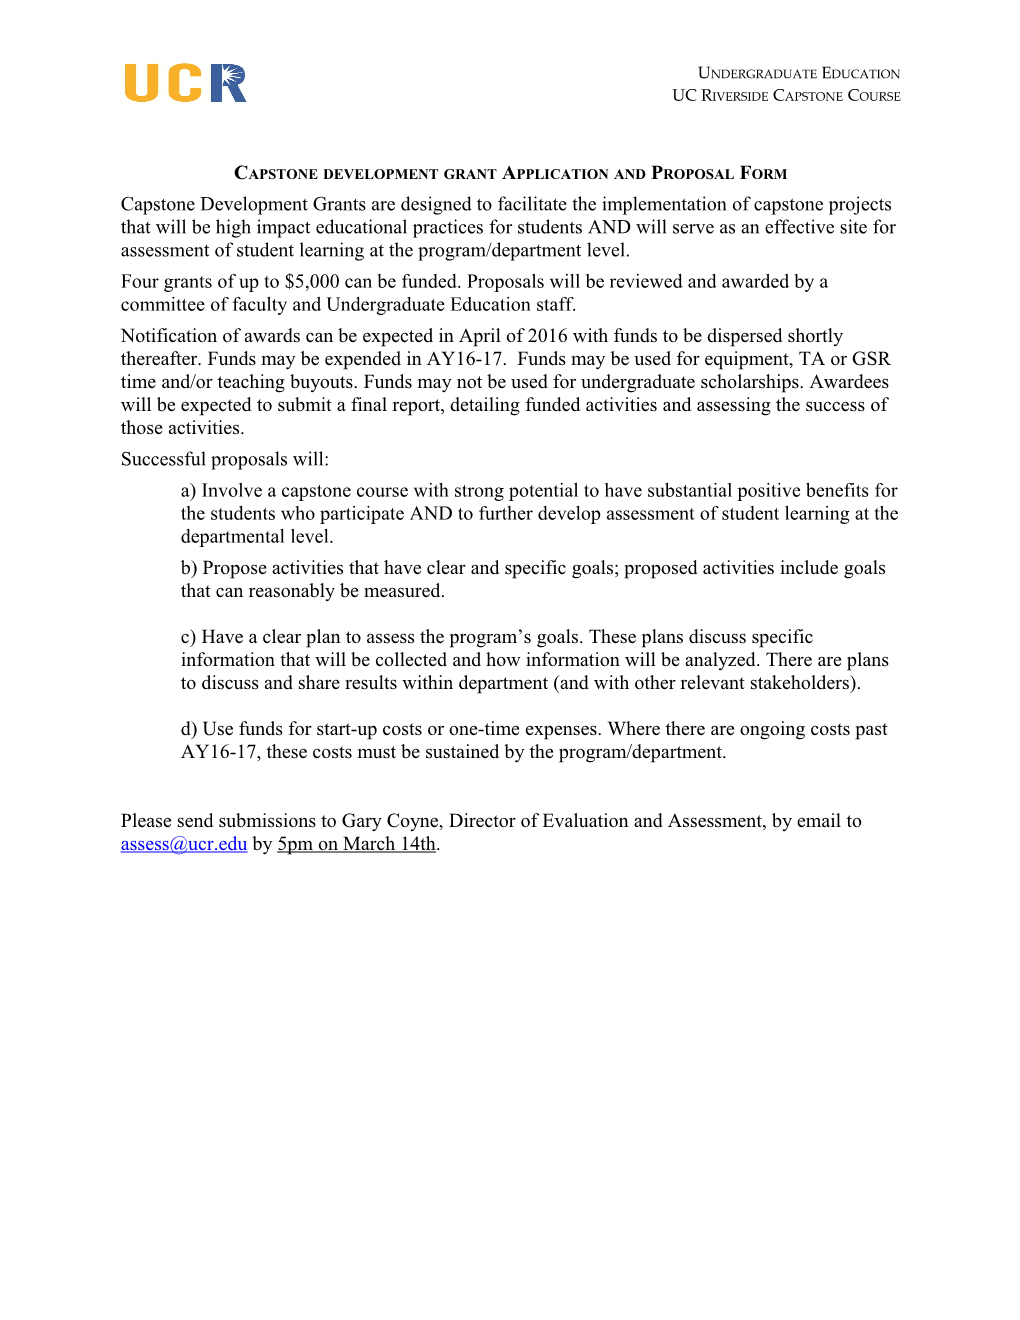 Capstone Development Grant Application and Proposal Form